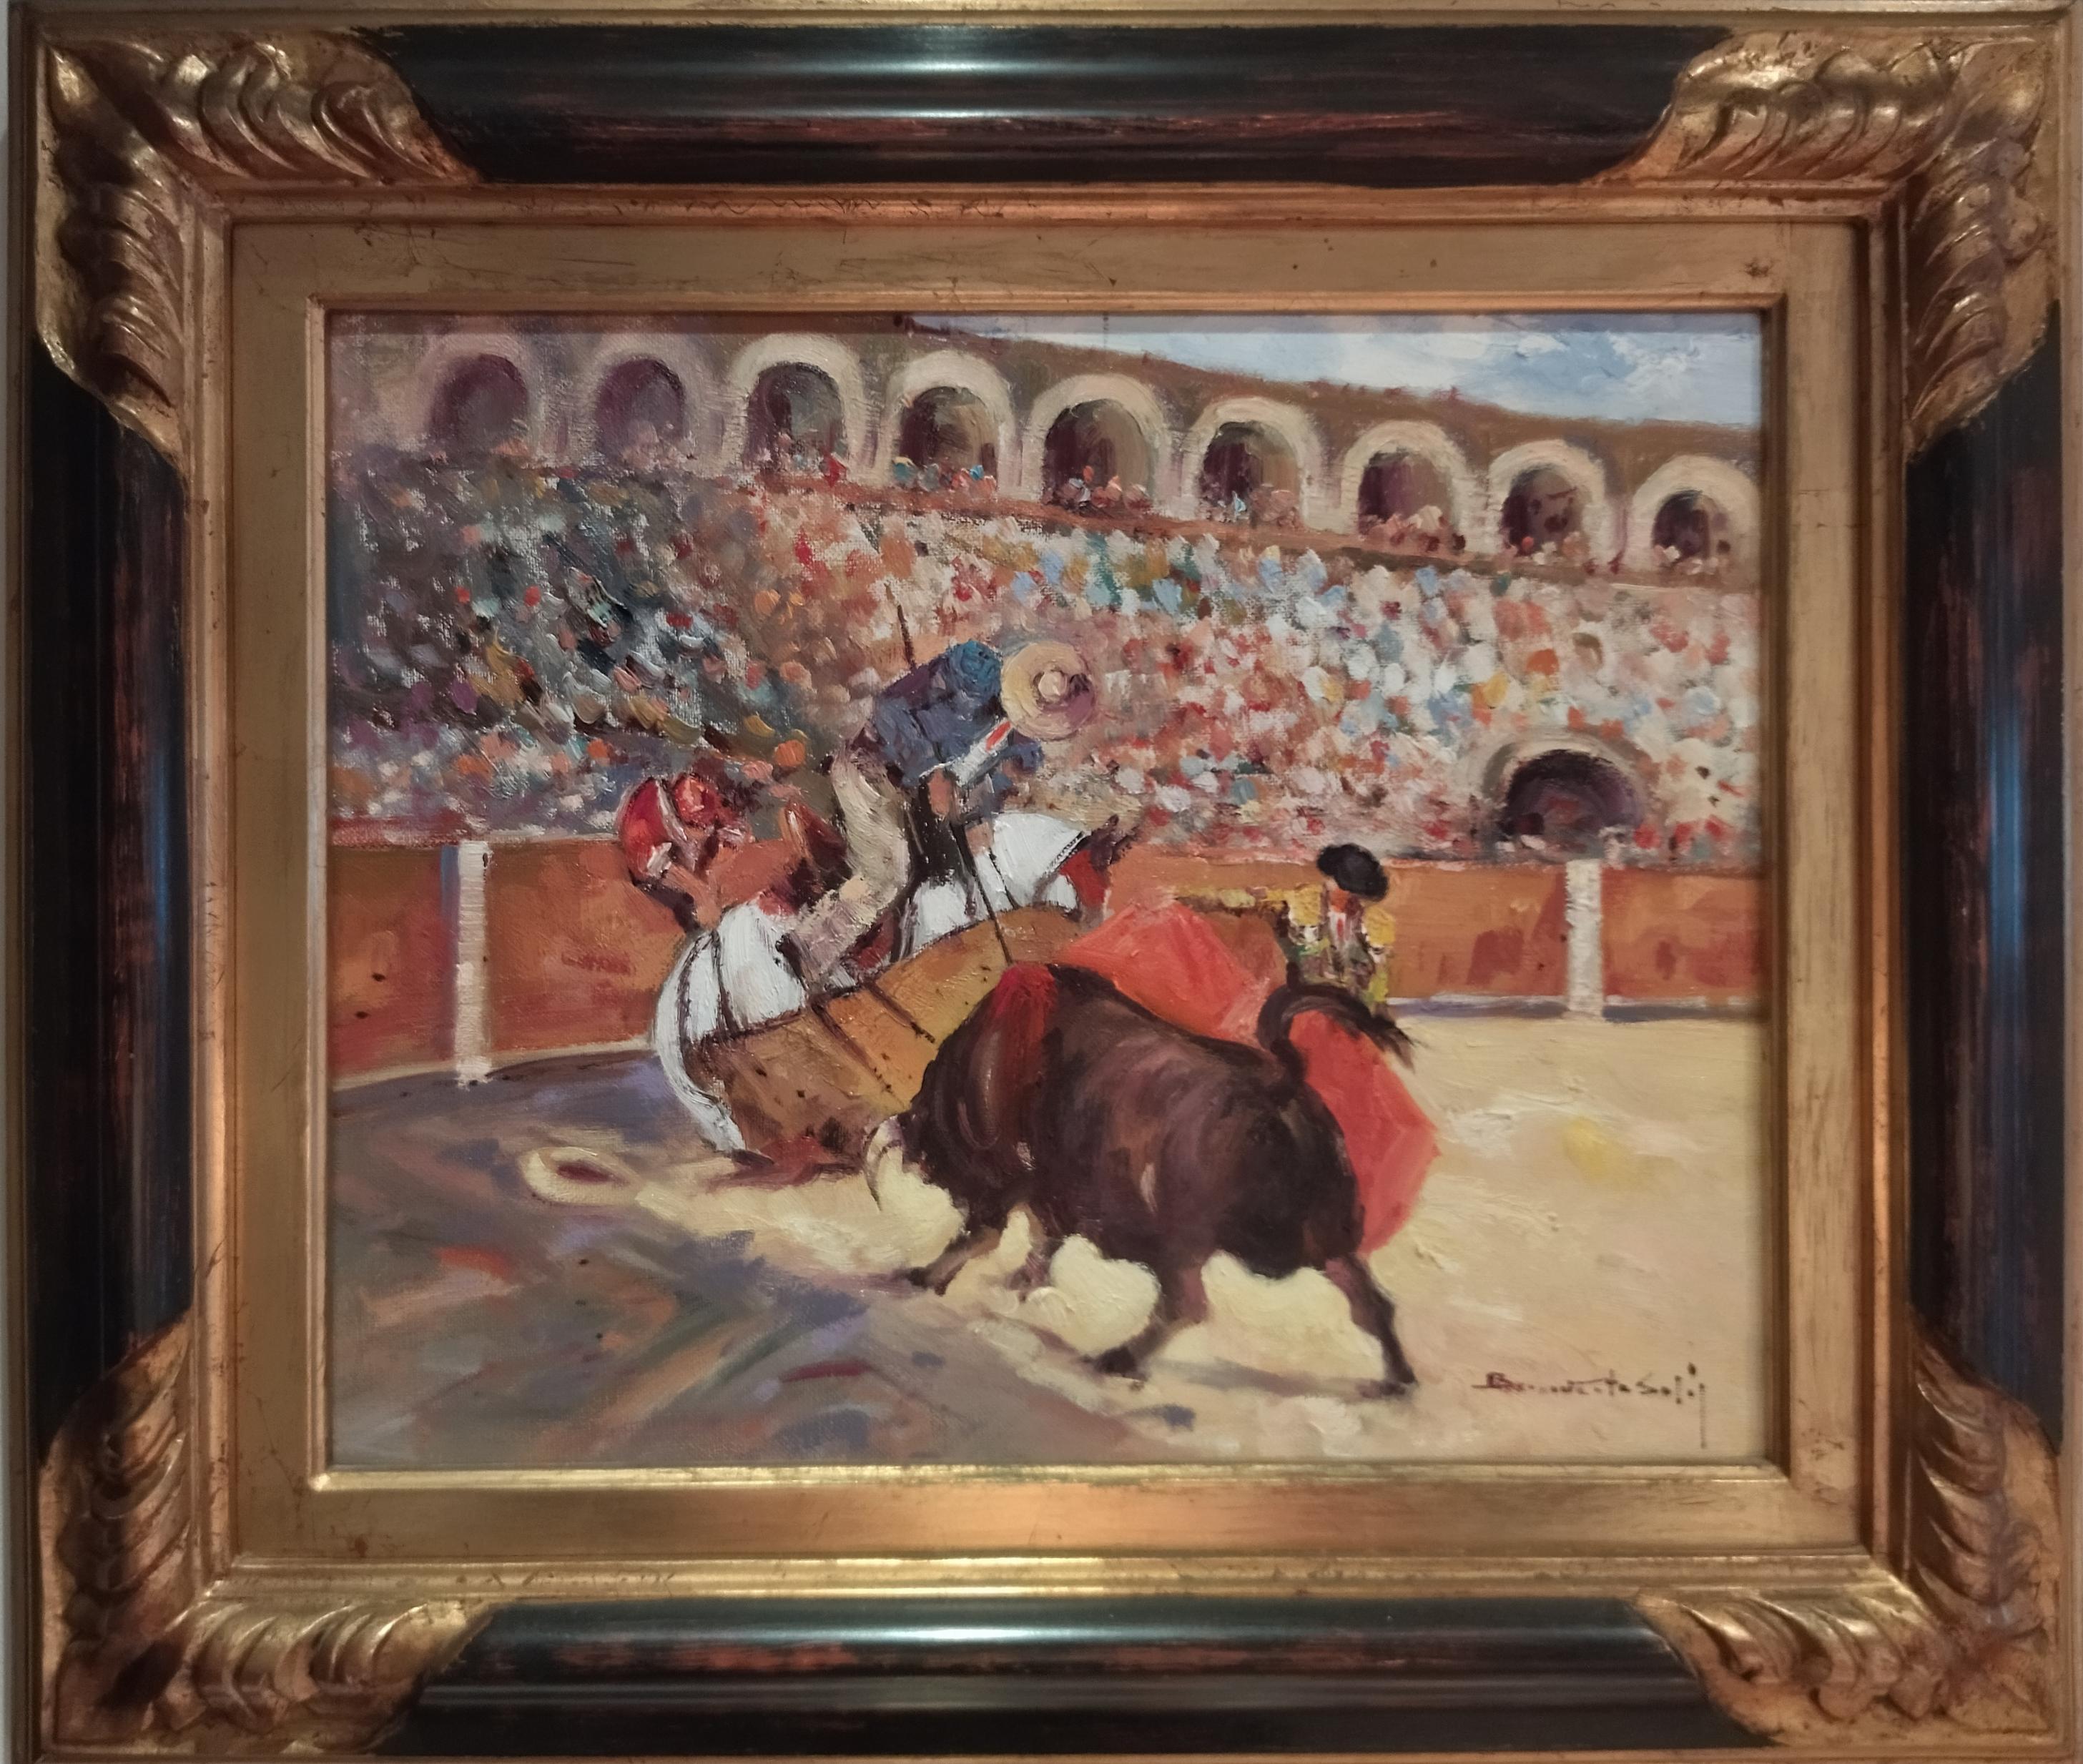  bullfight original expressionist acrylic painting. Framed
During its first exhibition in Paris, the French press catalogs it like "The Catalan Sorolla".
Honorary Member of the MECOART (Mediterranean Container Art Center of San Francisco,